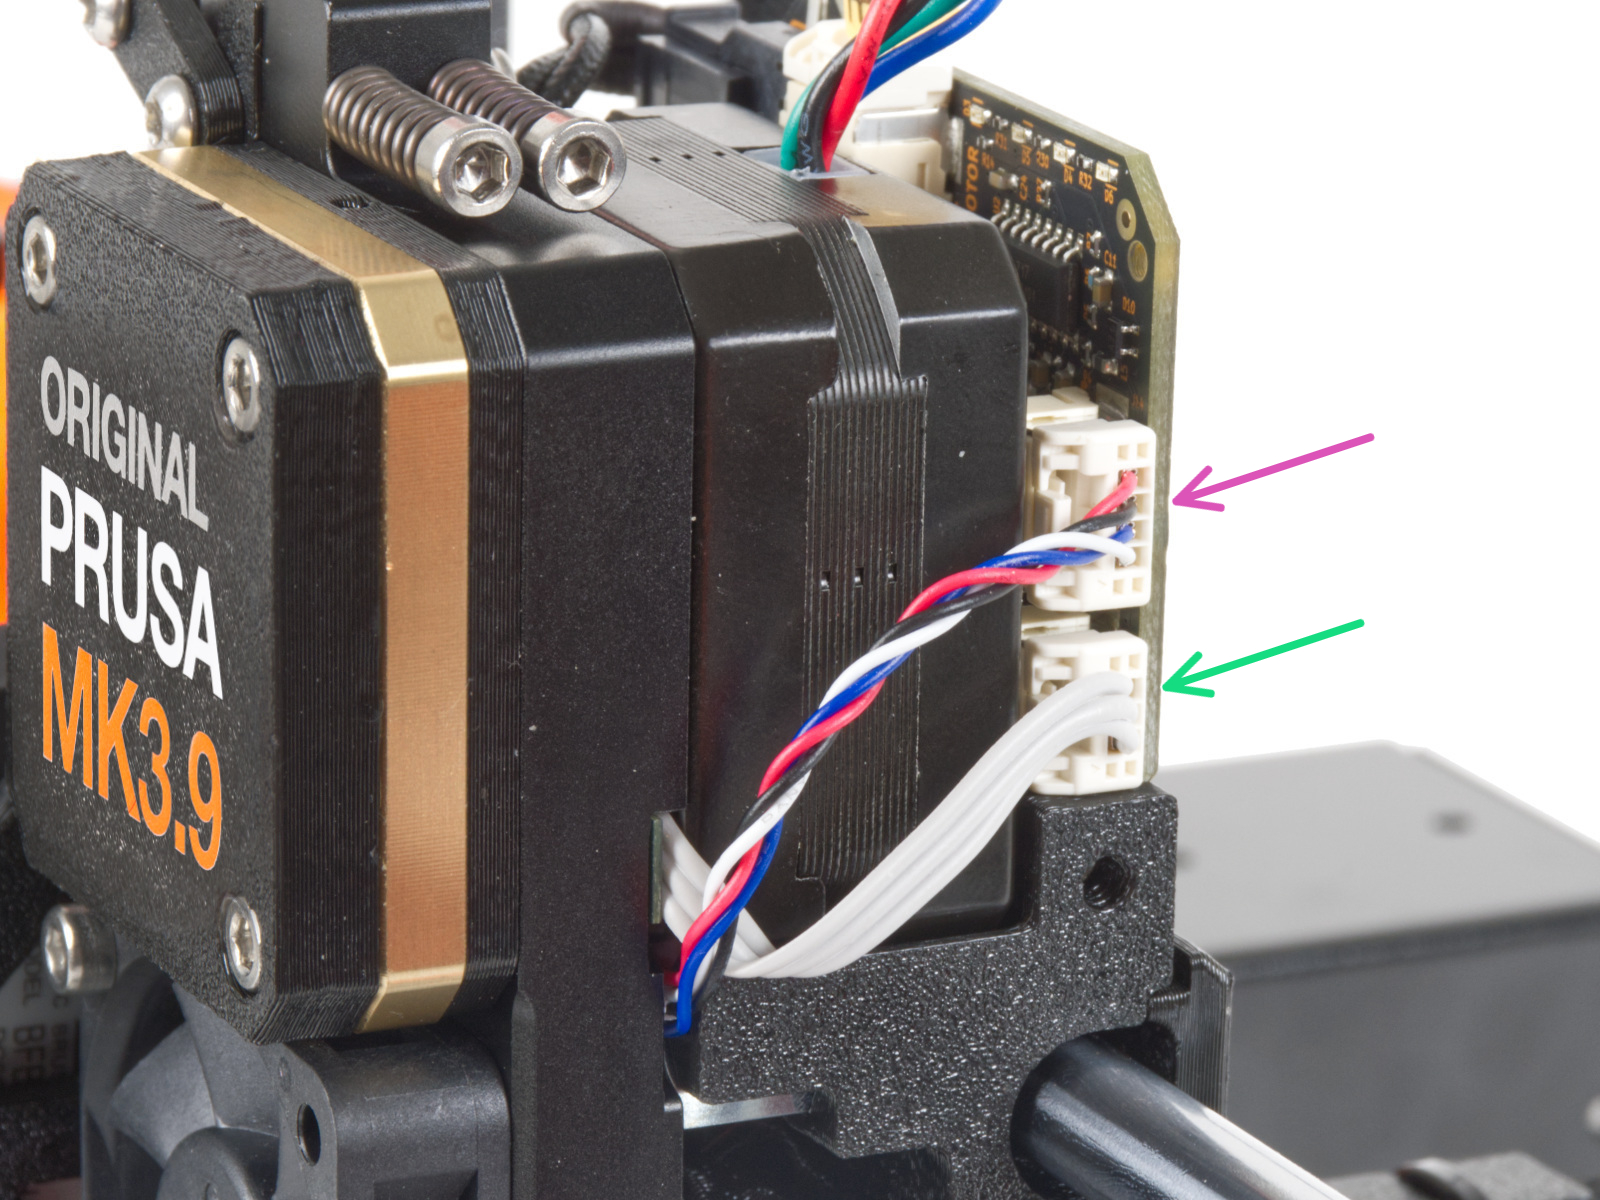 Connecting the extruder cables